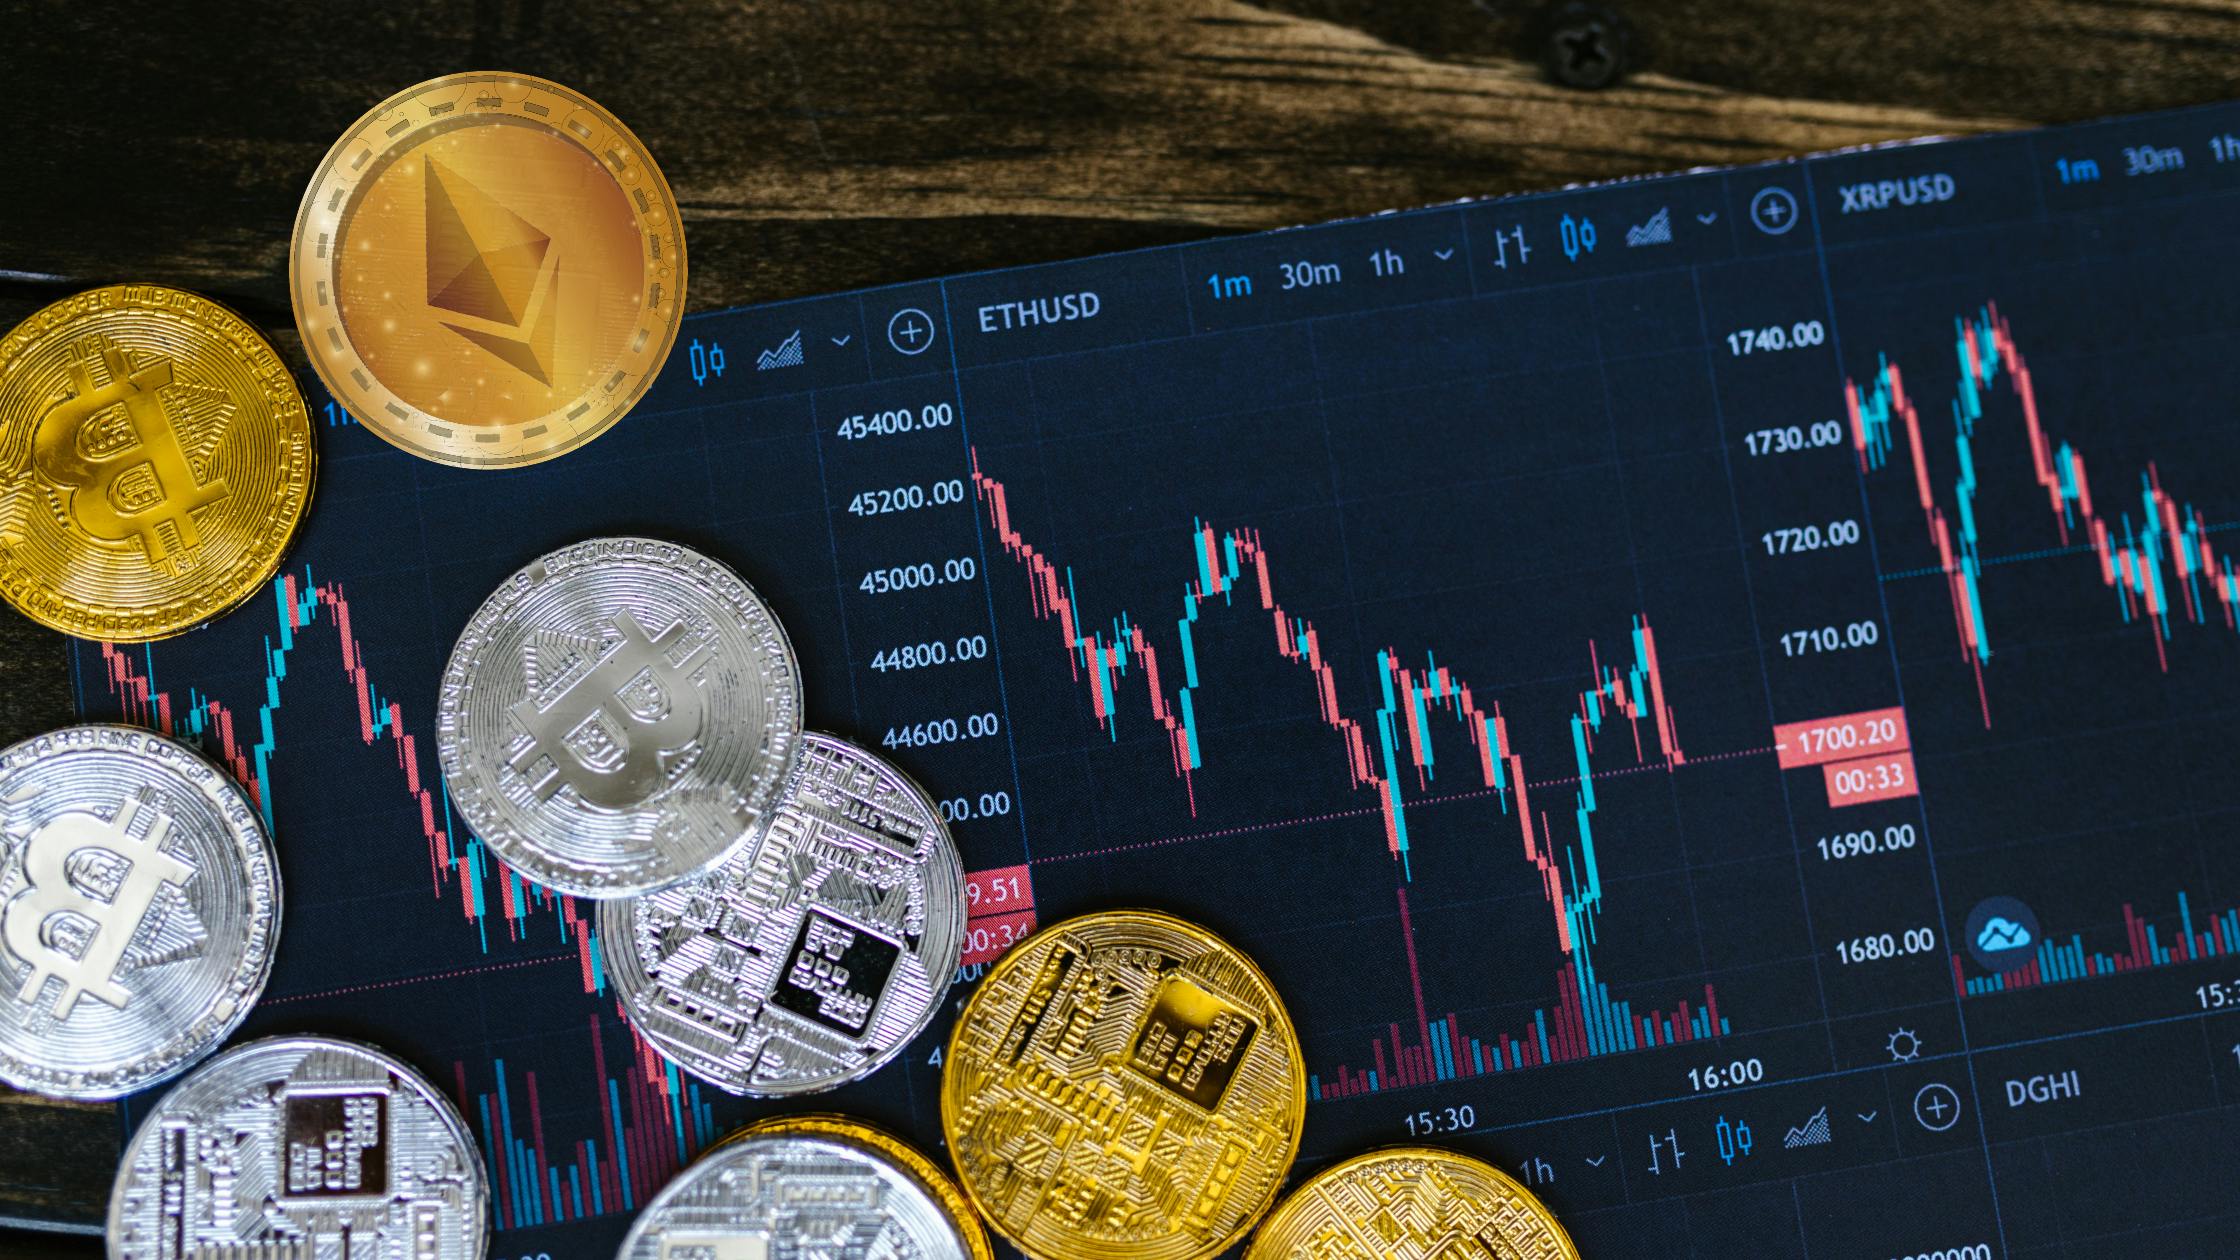 Here's How Crypto Market Could Recover Faster, According to FTX U.S. President Brett Harrison